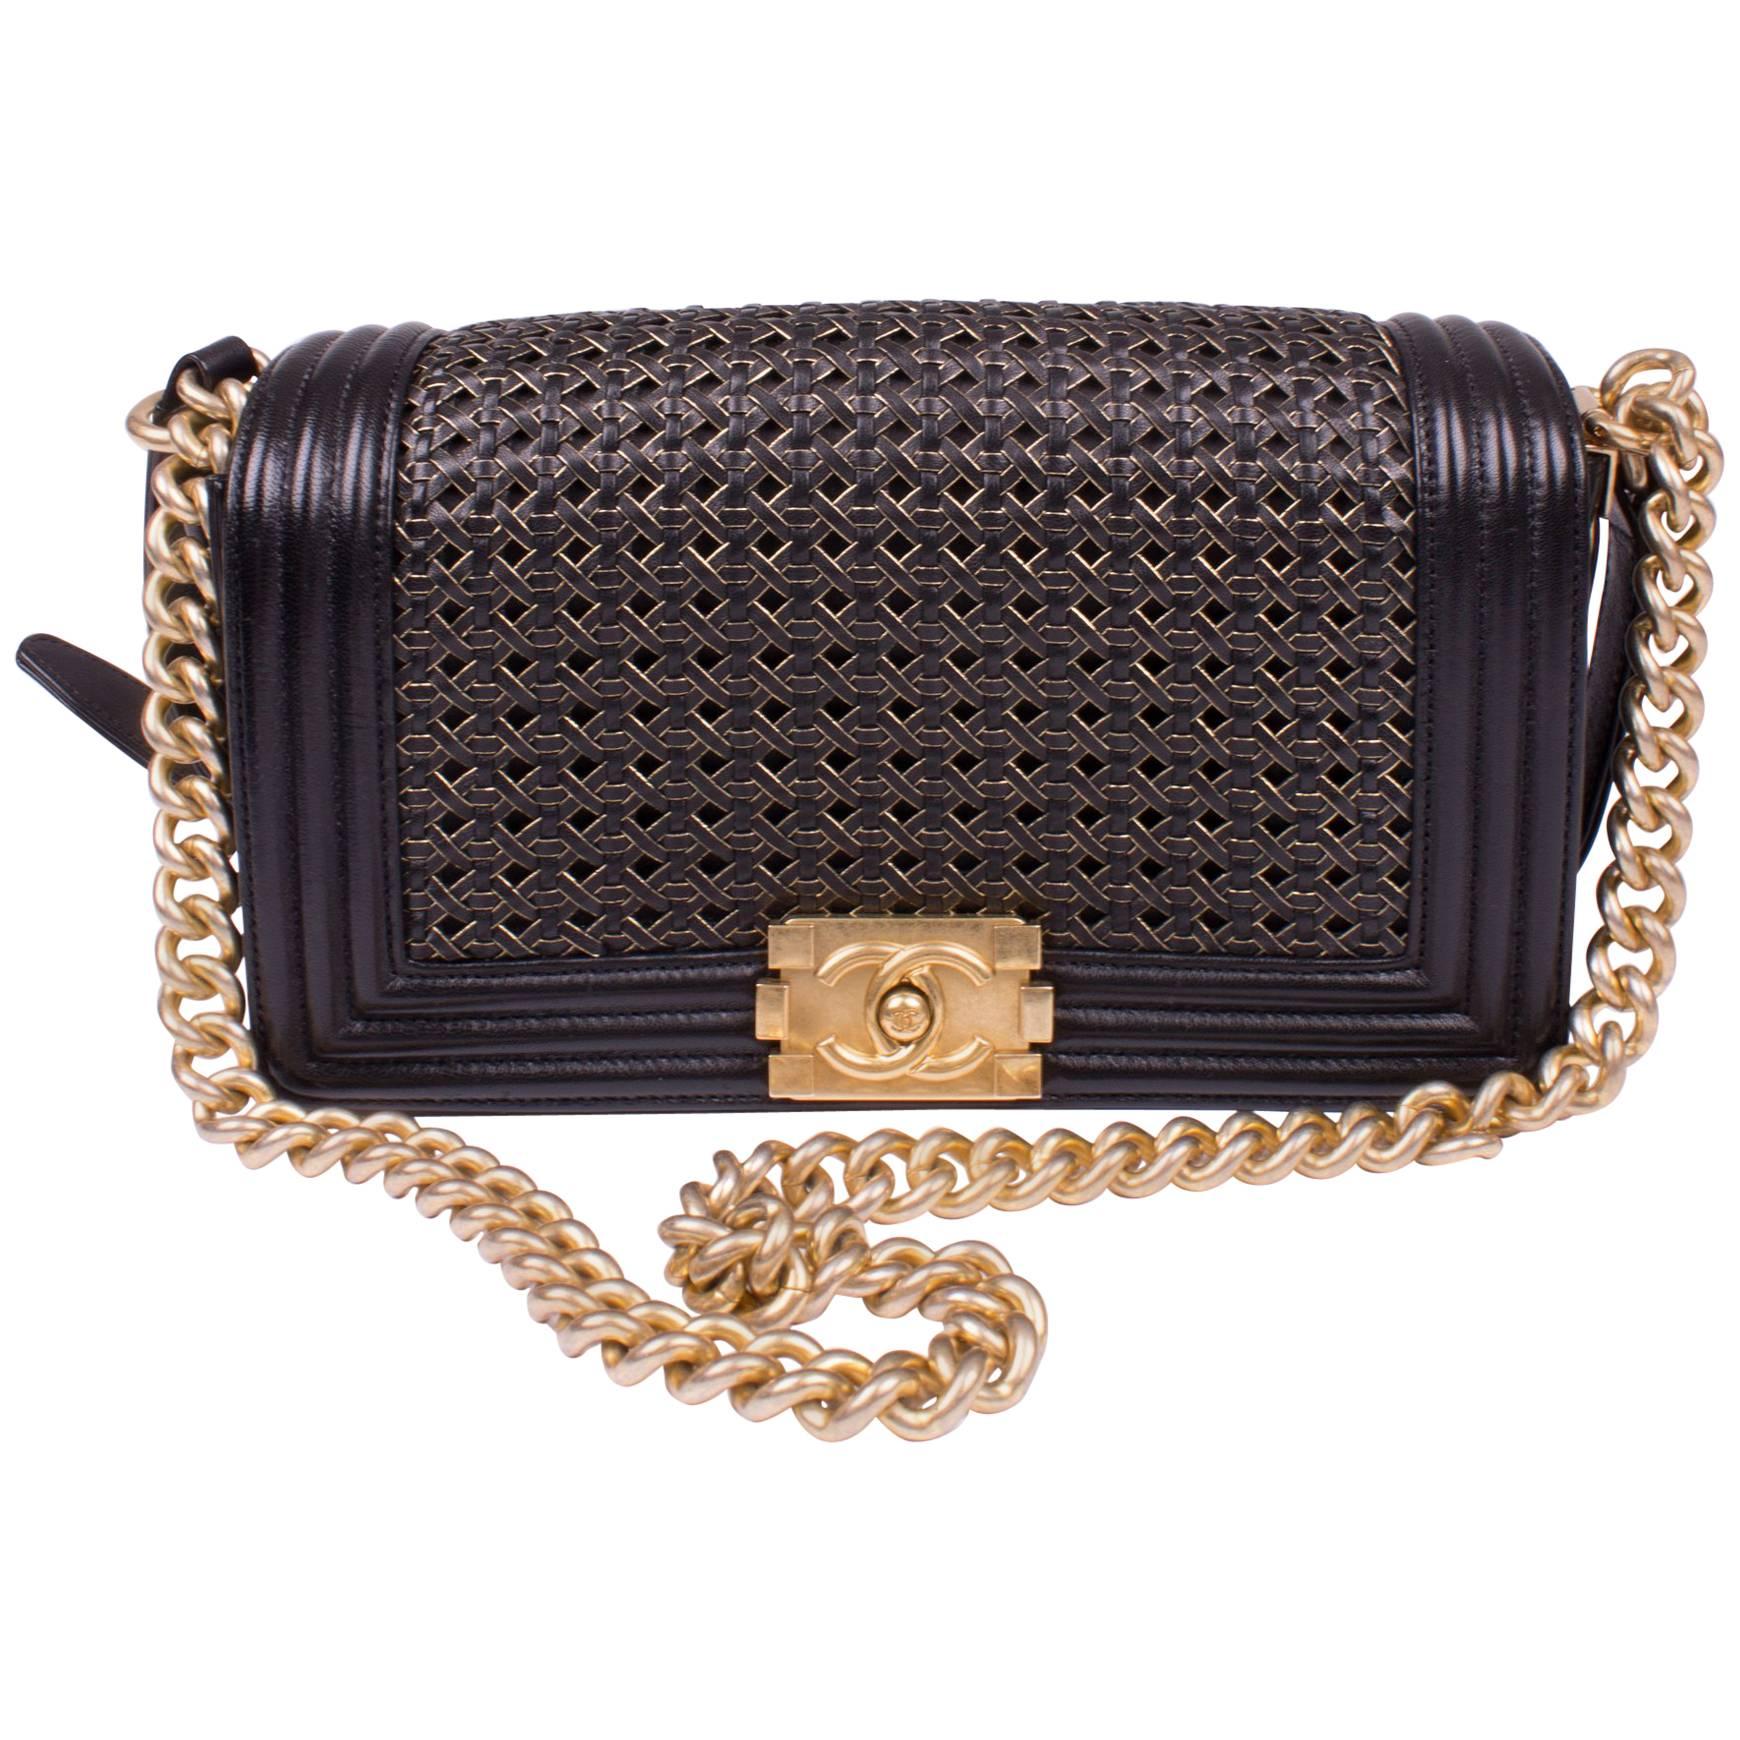 Chanel Le Boy Bag Woven Limited Edition Spring 2014 - black/gold 